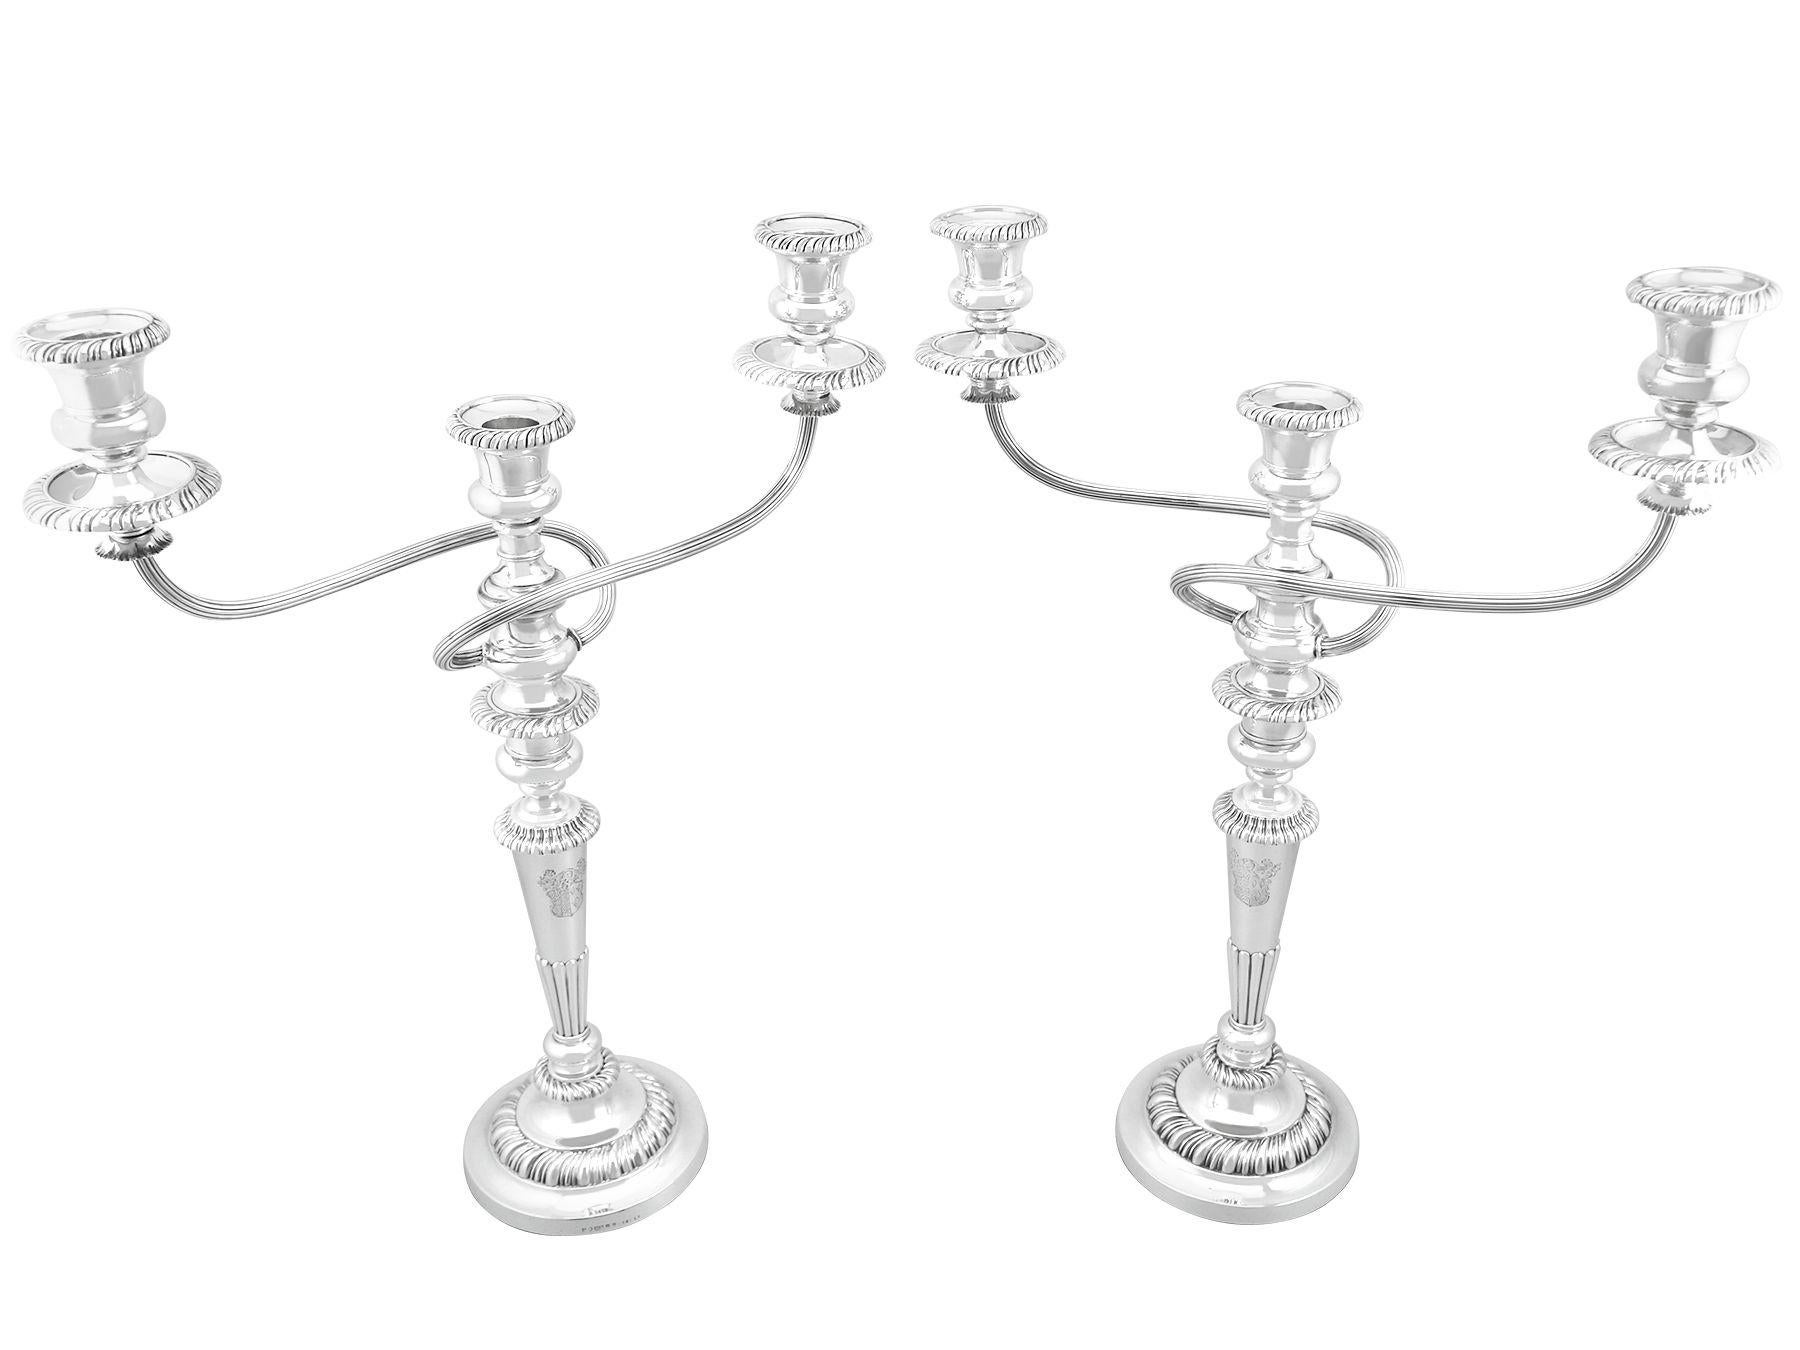 A magnificent, fine and impressive pair of antique Georgian English sterling silver three light candelabra made by Matthew Boulton; an addition to our ornamental silverware collection

These magnificent and rareantique silver candelabra in